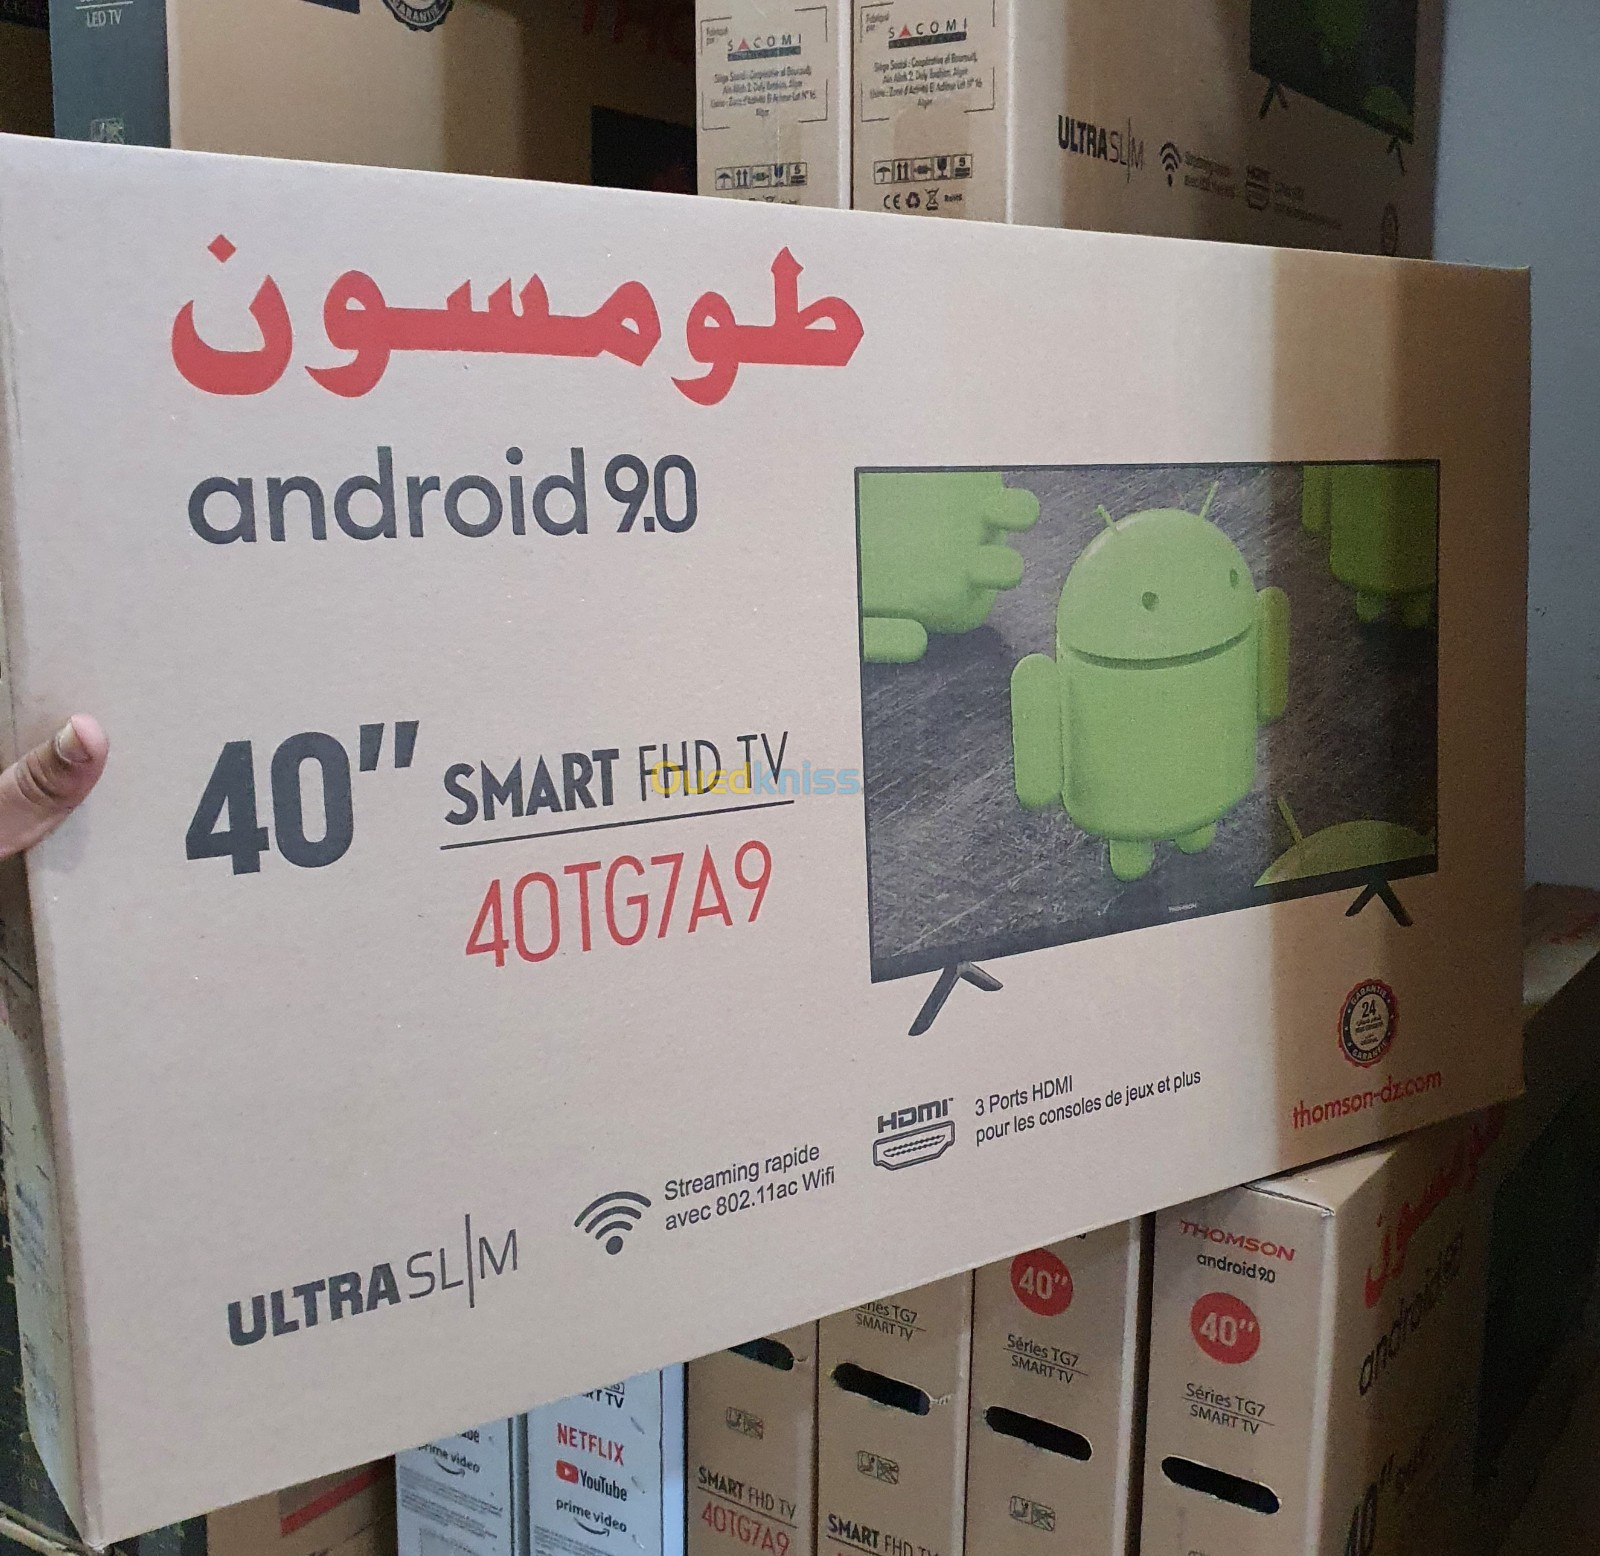 Thomson Android TV 40'' FHD